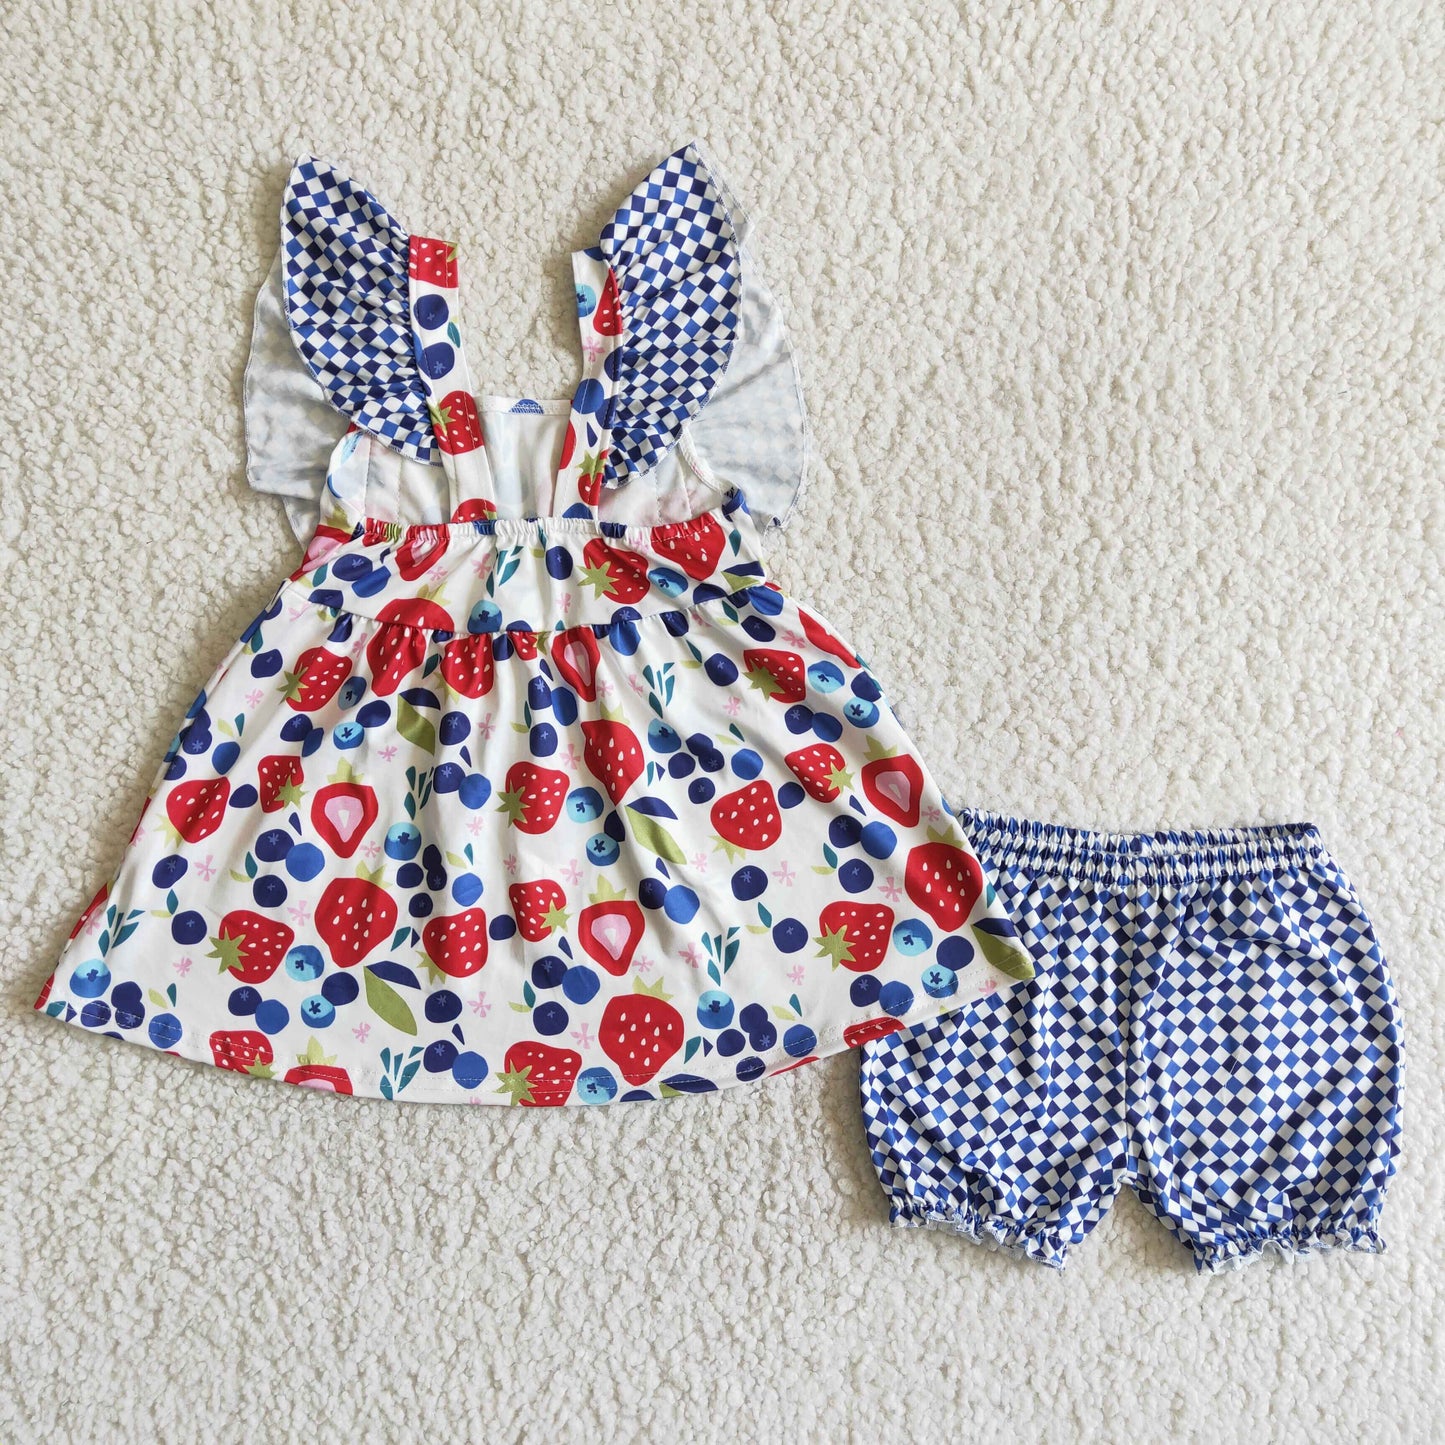 fruit girl’s outfit shorts set summer